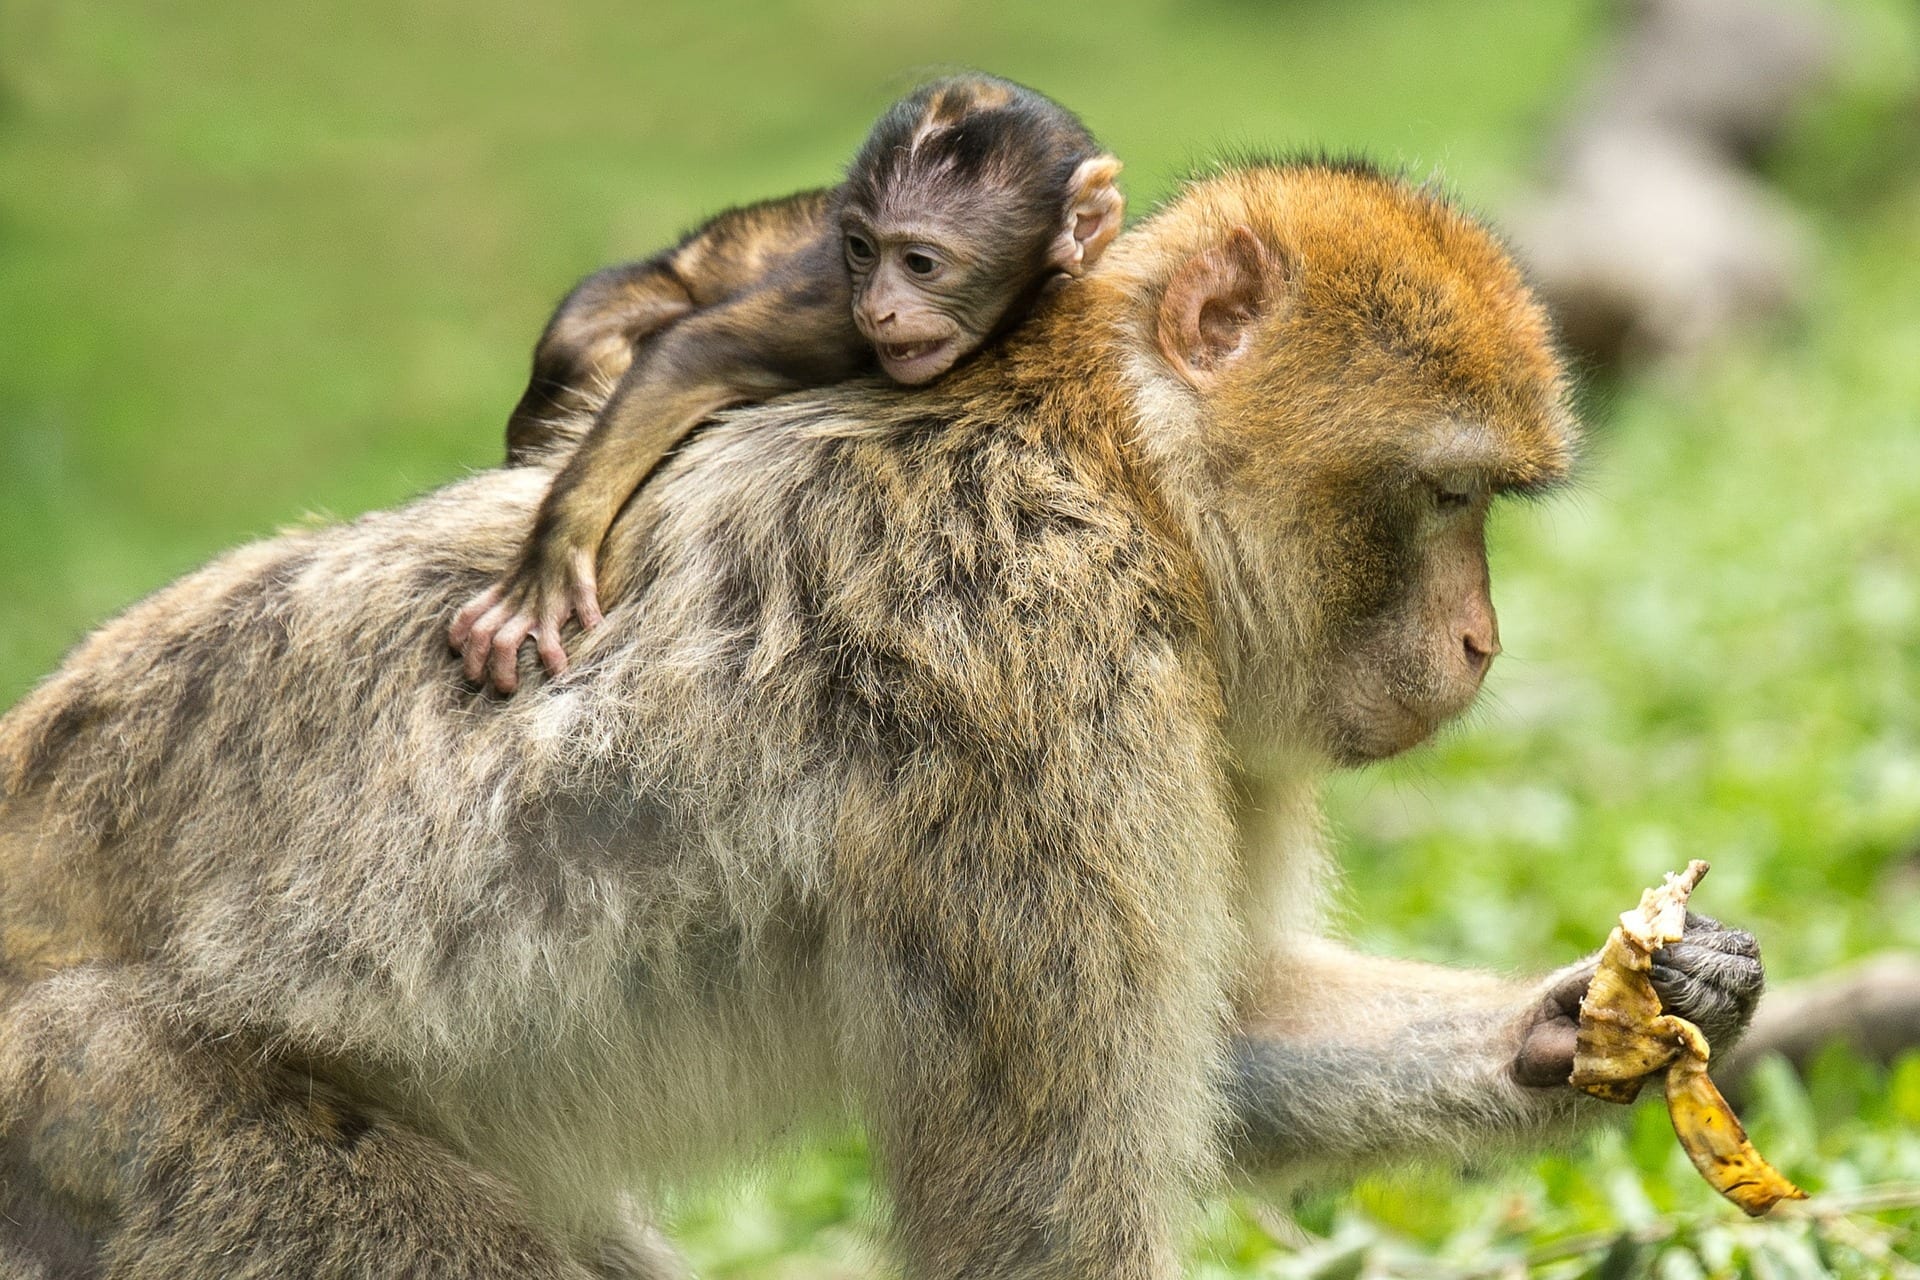 a monkey with its baby on its back